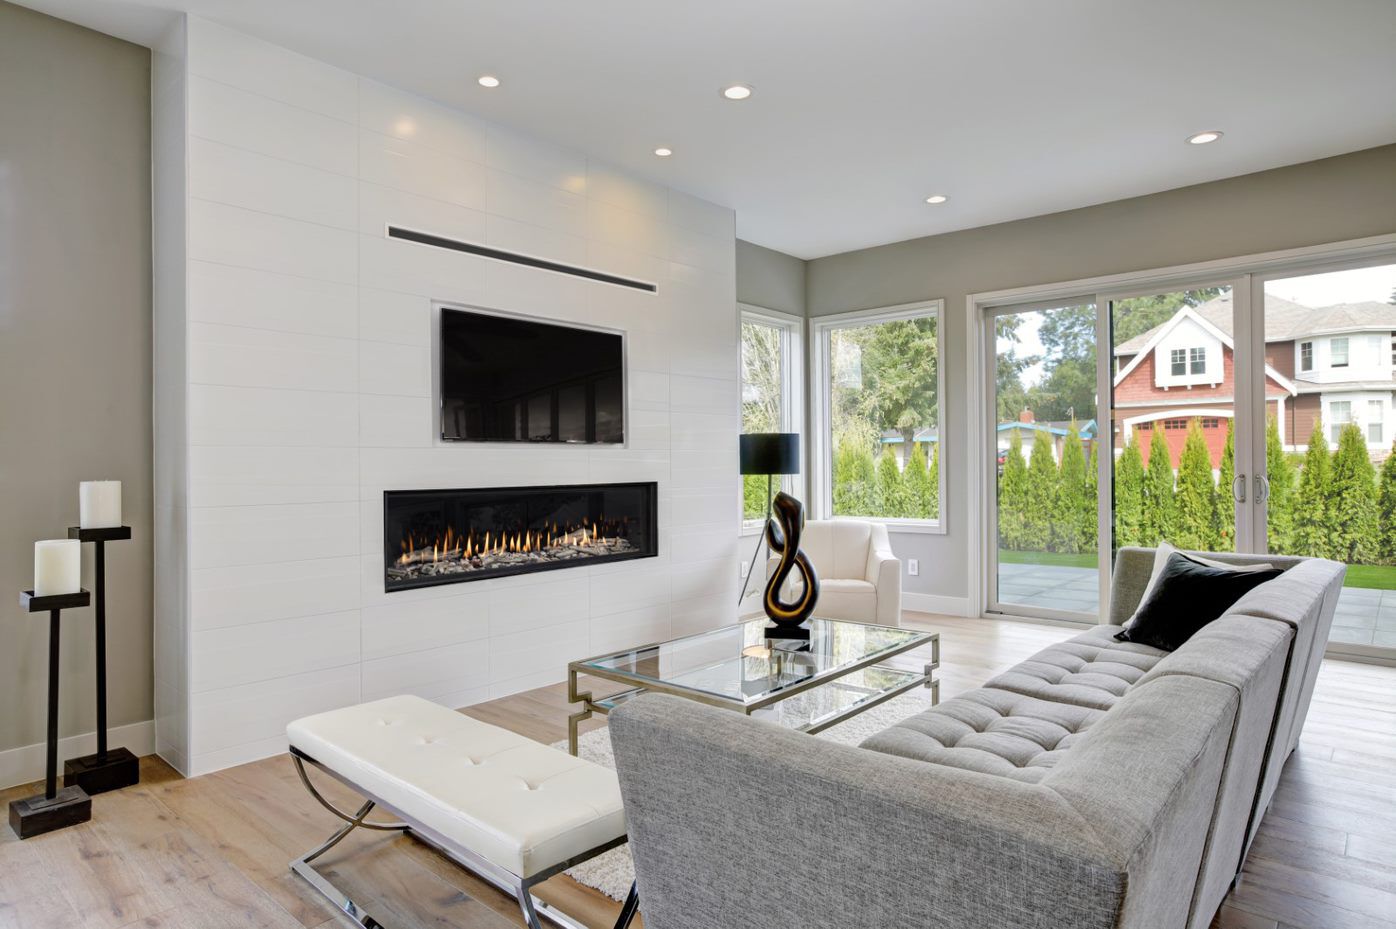 A modern living space with a black, white, and gray color scheme, light wooden floors, floor-to-ceiling windows, and a large feature wall with a linear gas fireplace and a flatscreen TV.